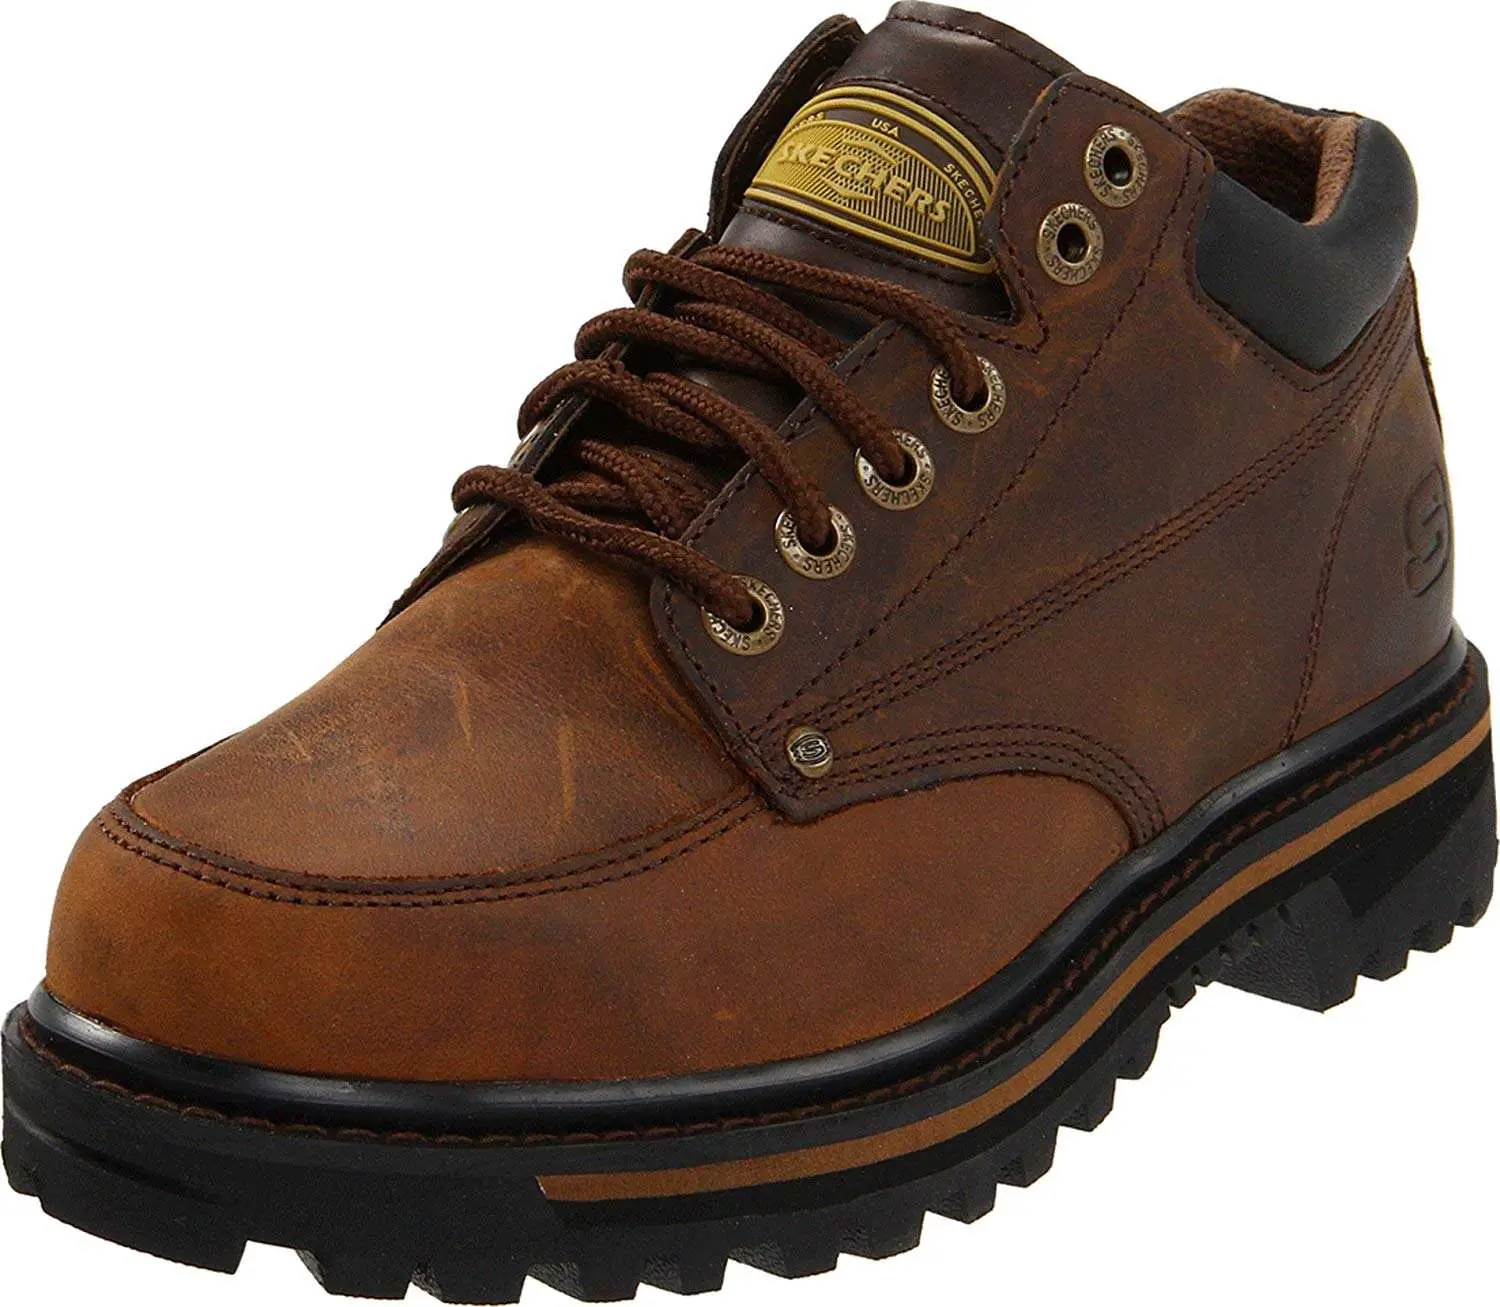 Most Comfortable Work Boots for Men